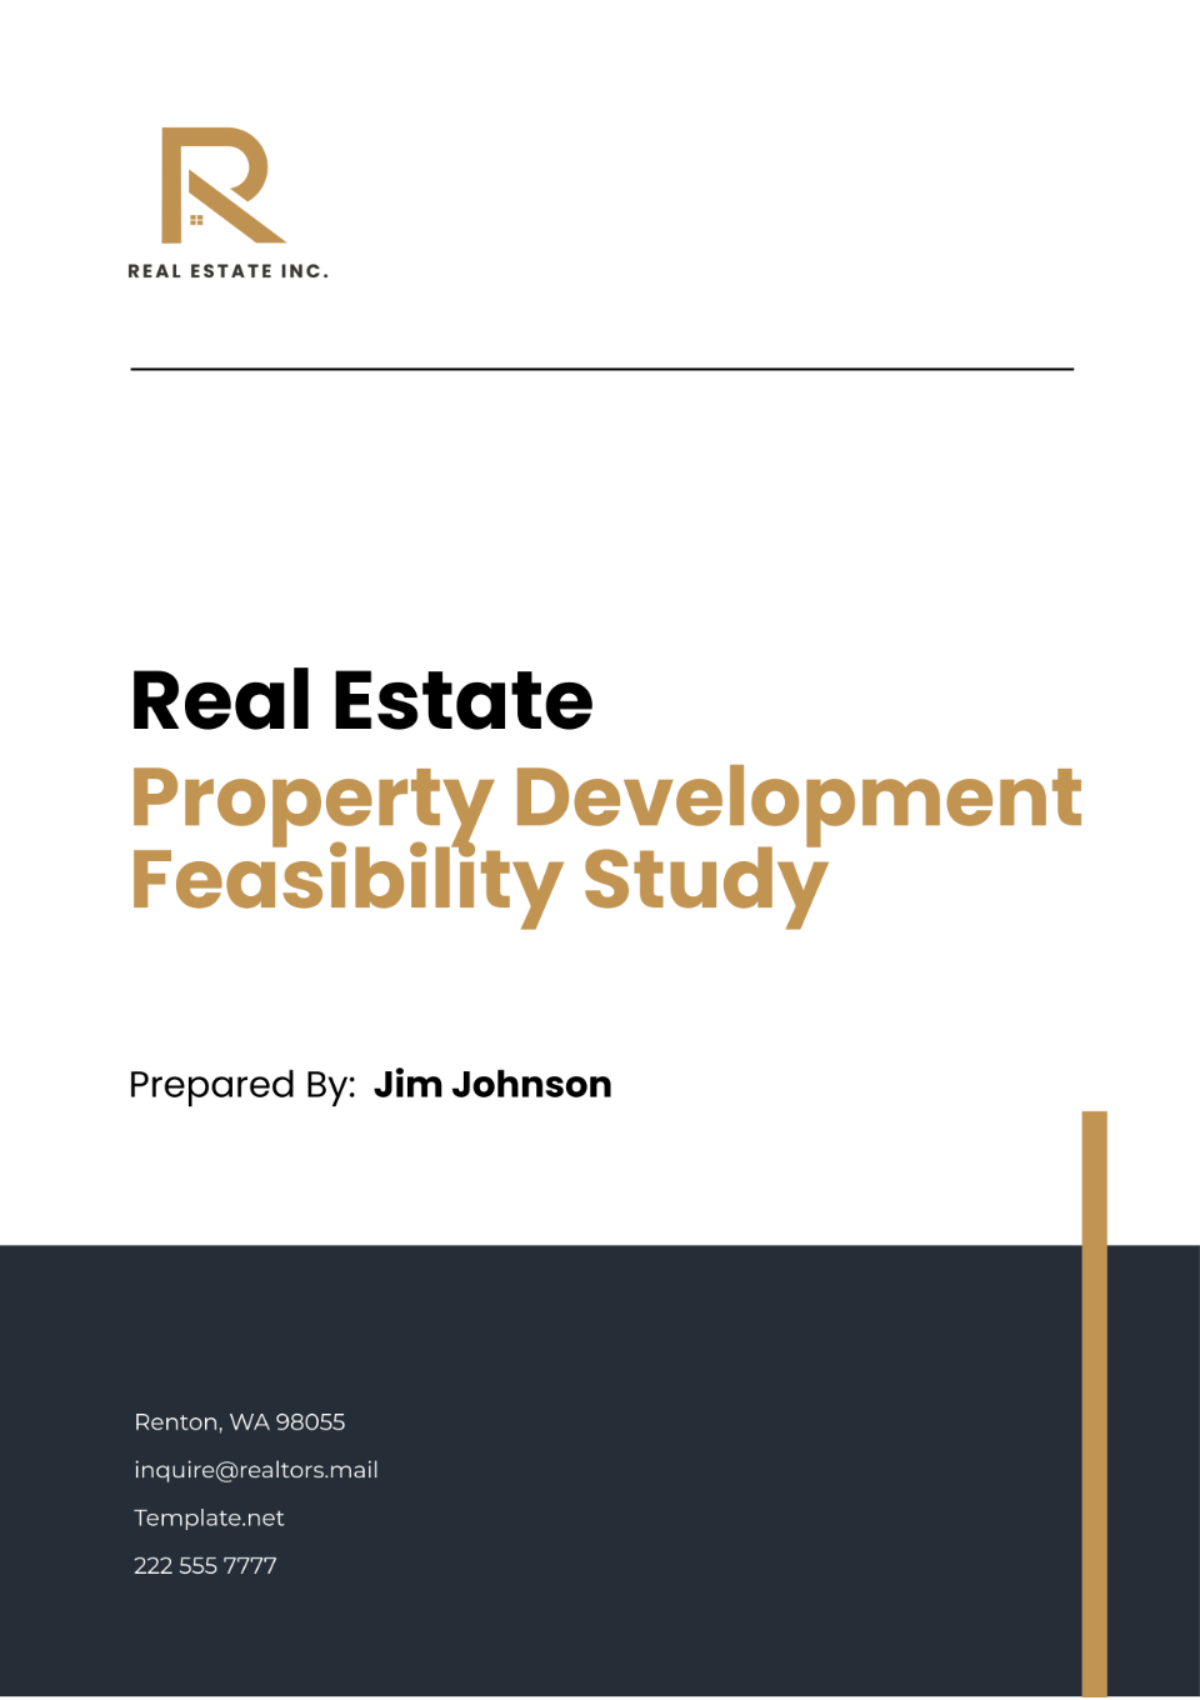 Real Estate Property Development Feasibility Study Template